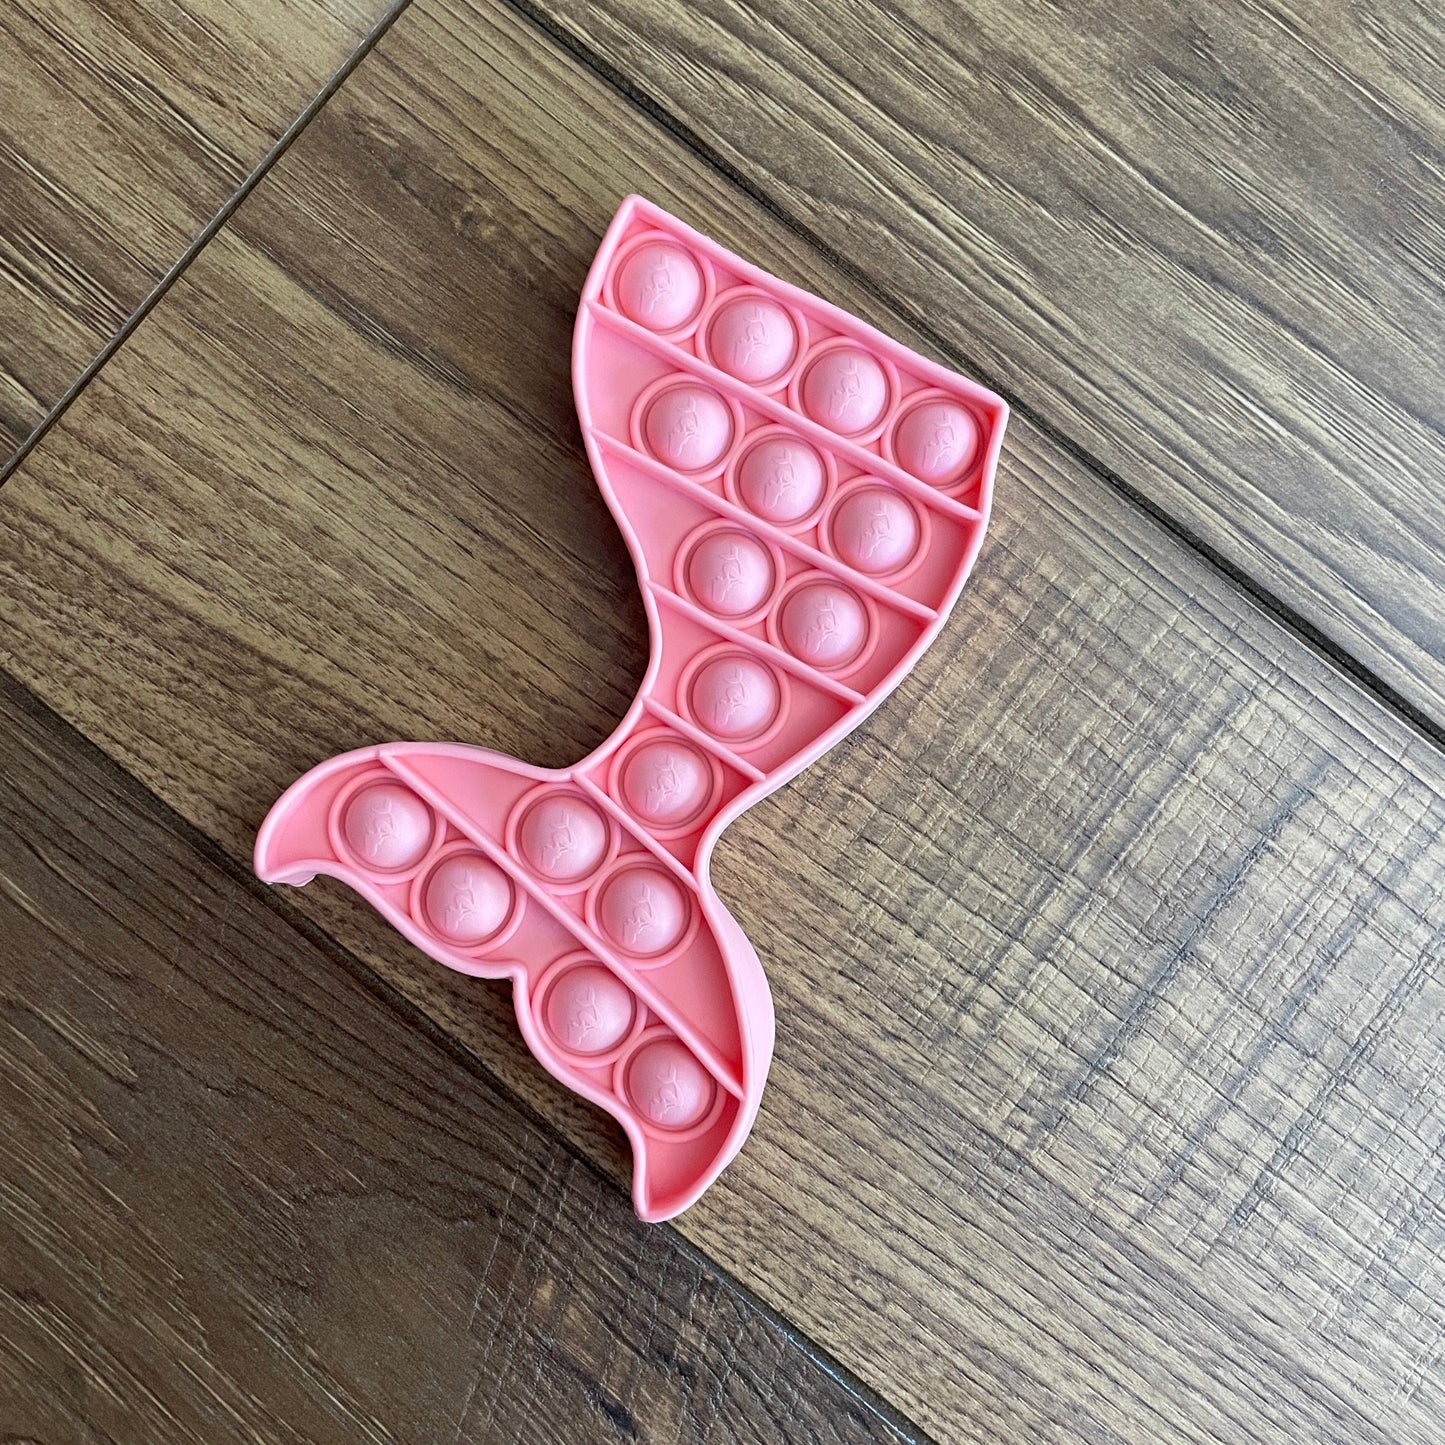 Silicone Fidget Poppers - Pink Mermaid Tail